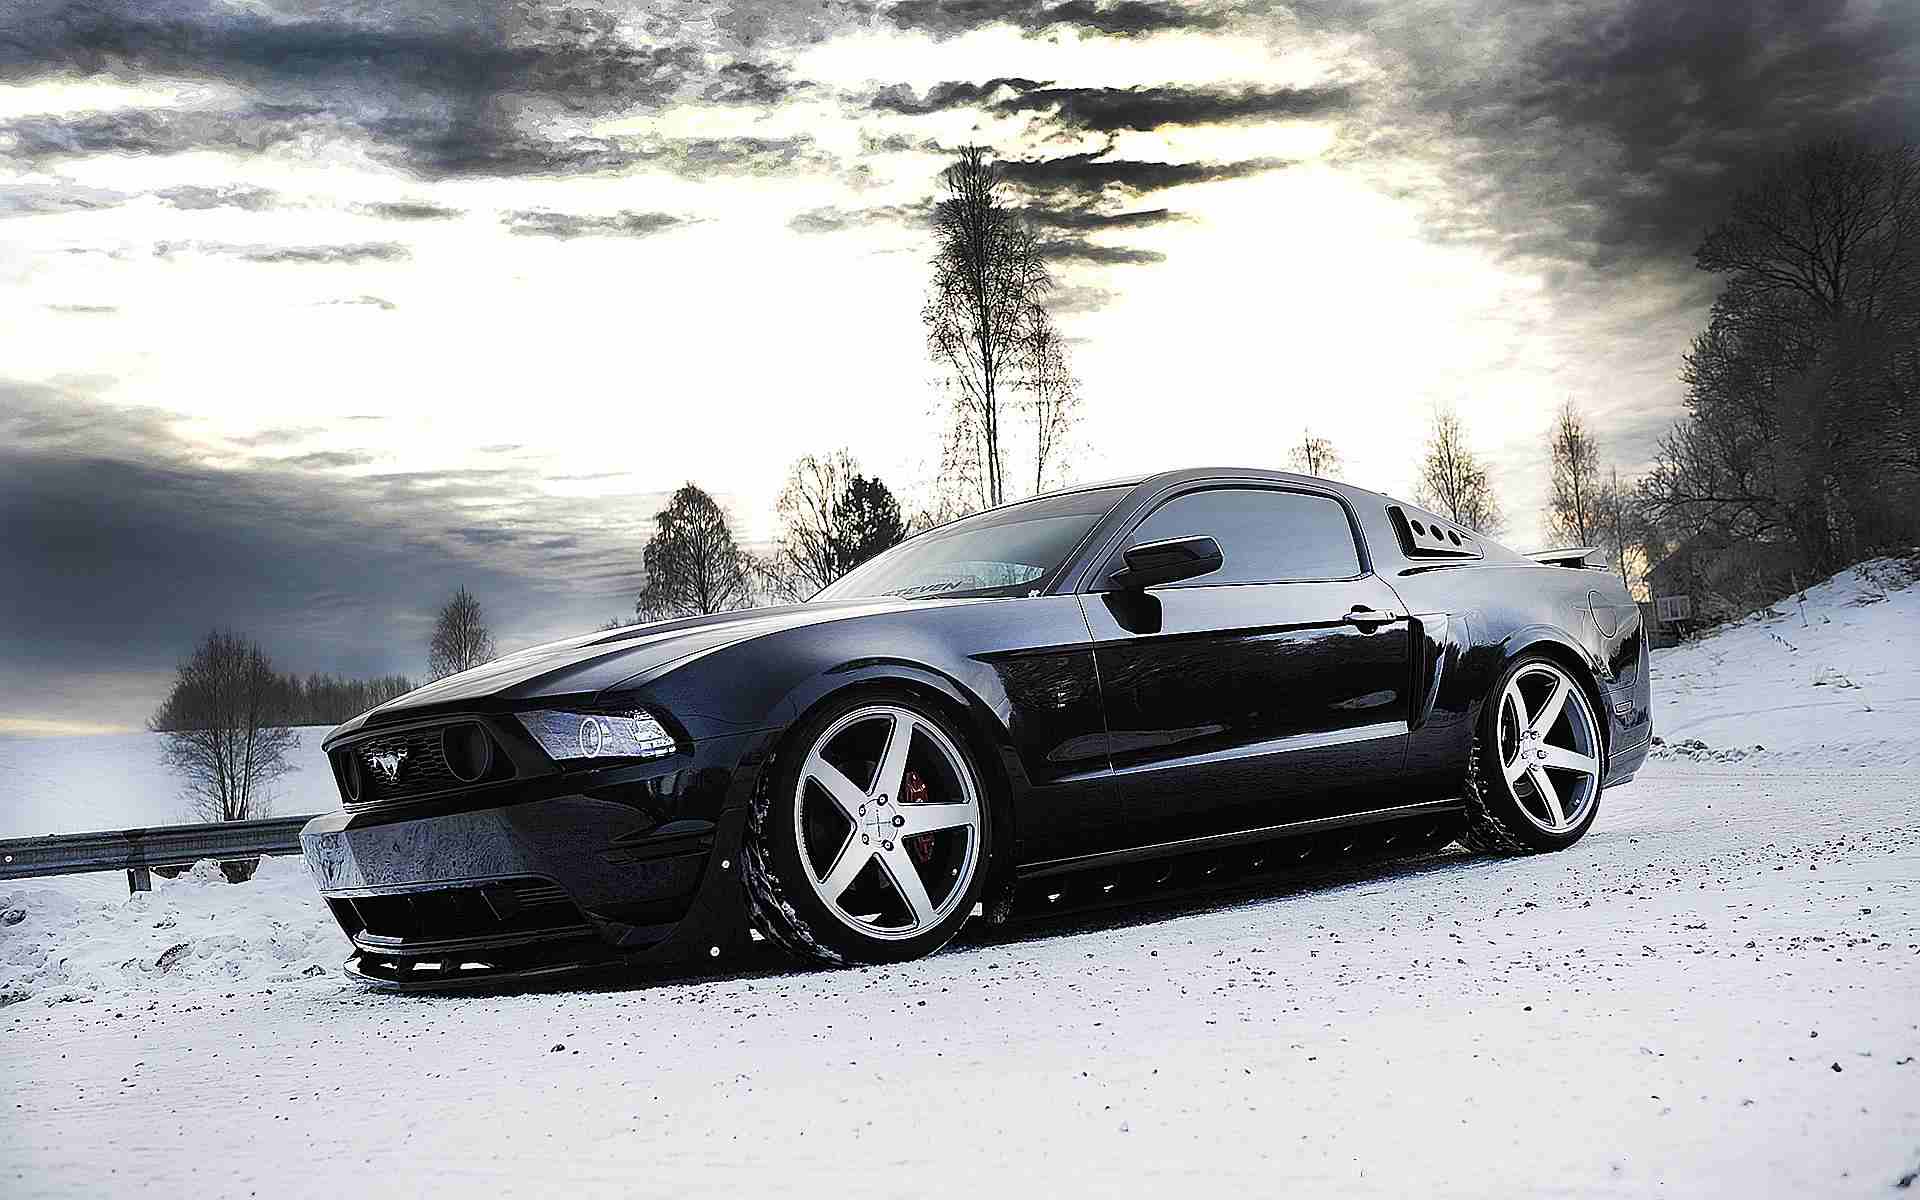 How to Prepare Your Mustang for Winter Driving